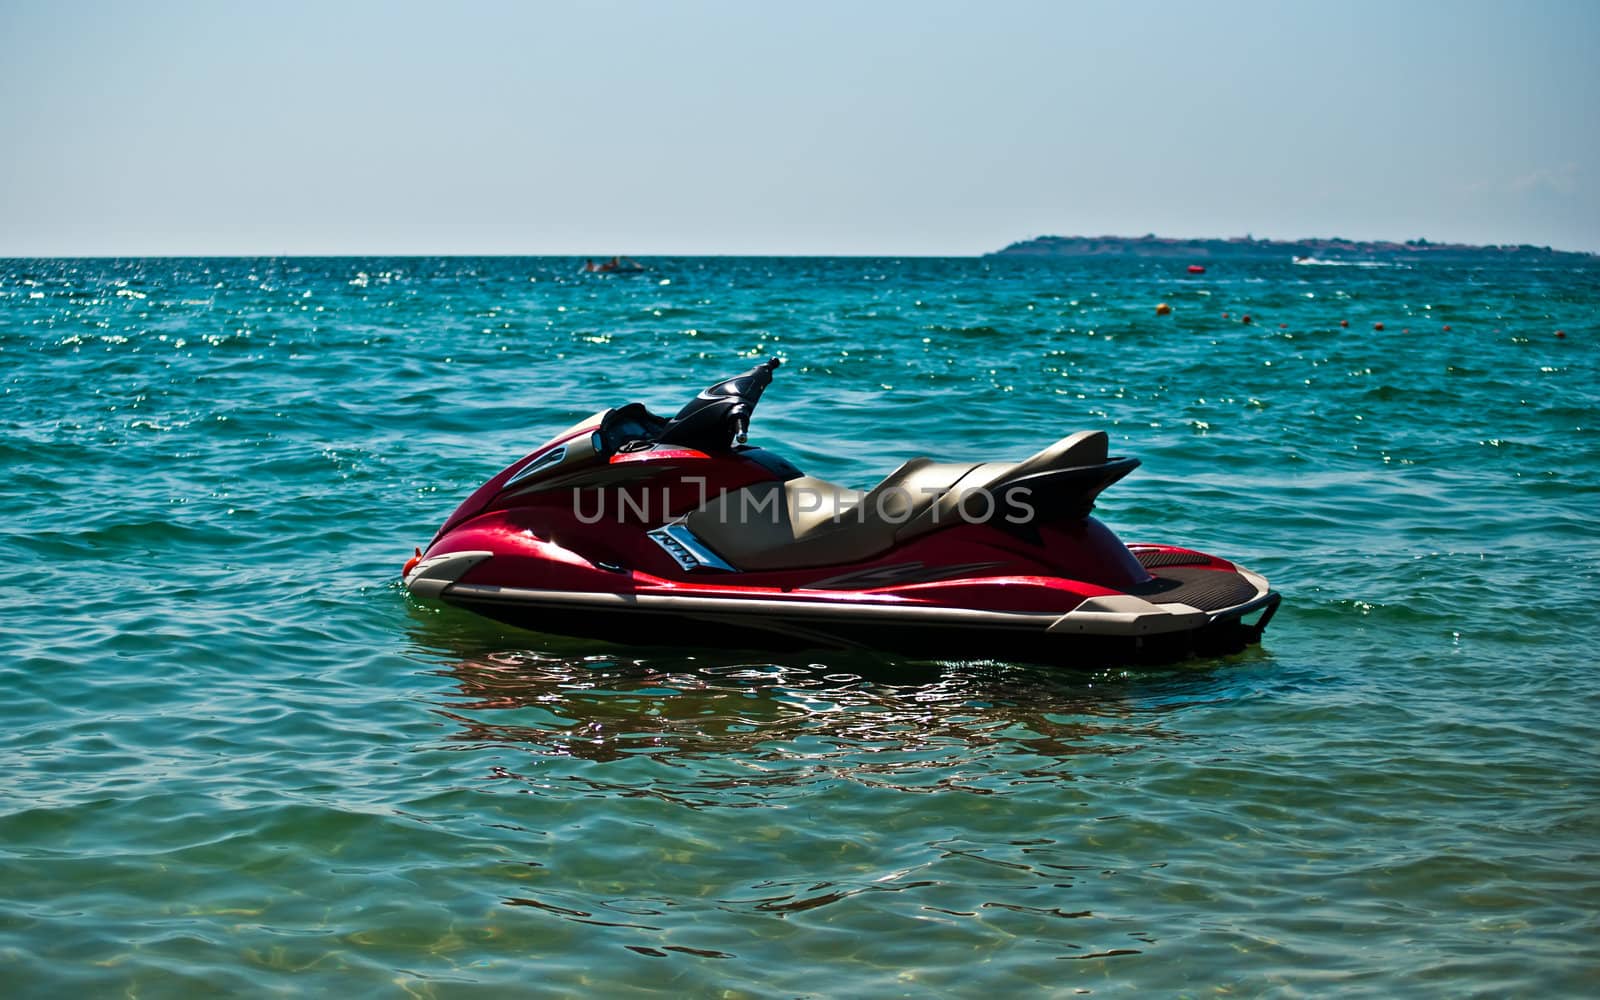 JetSki in the water . by LarisaP